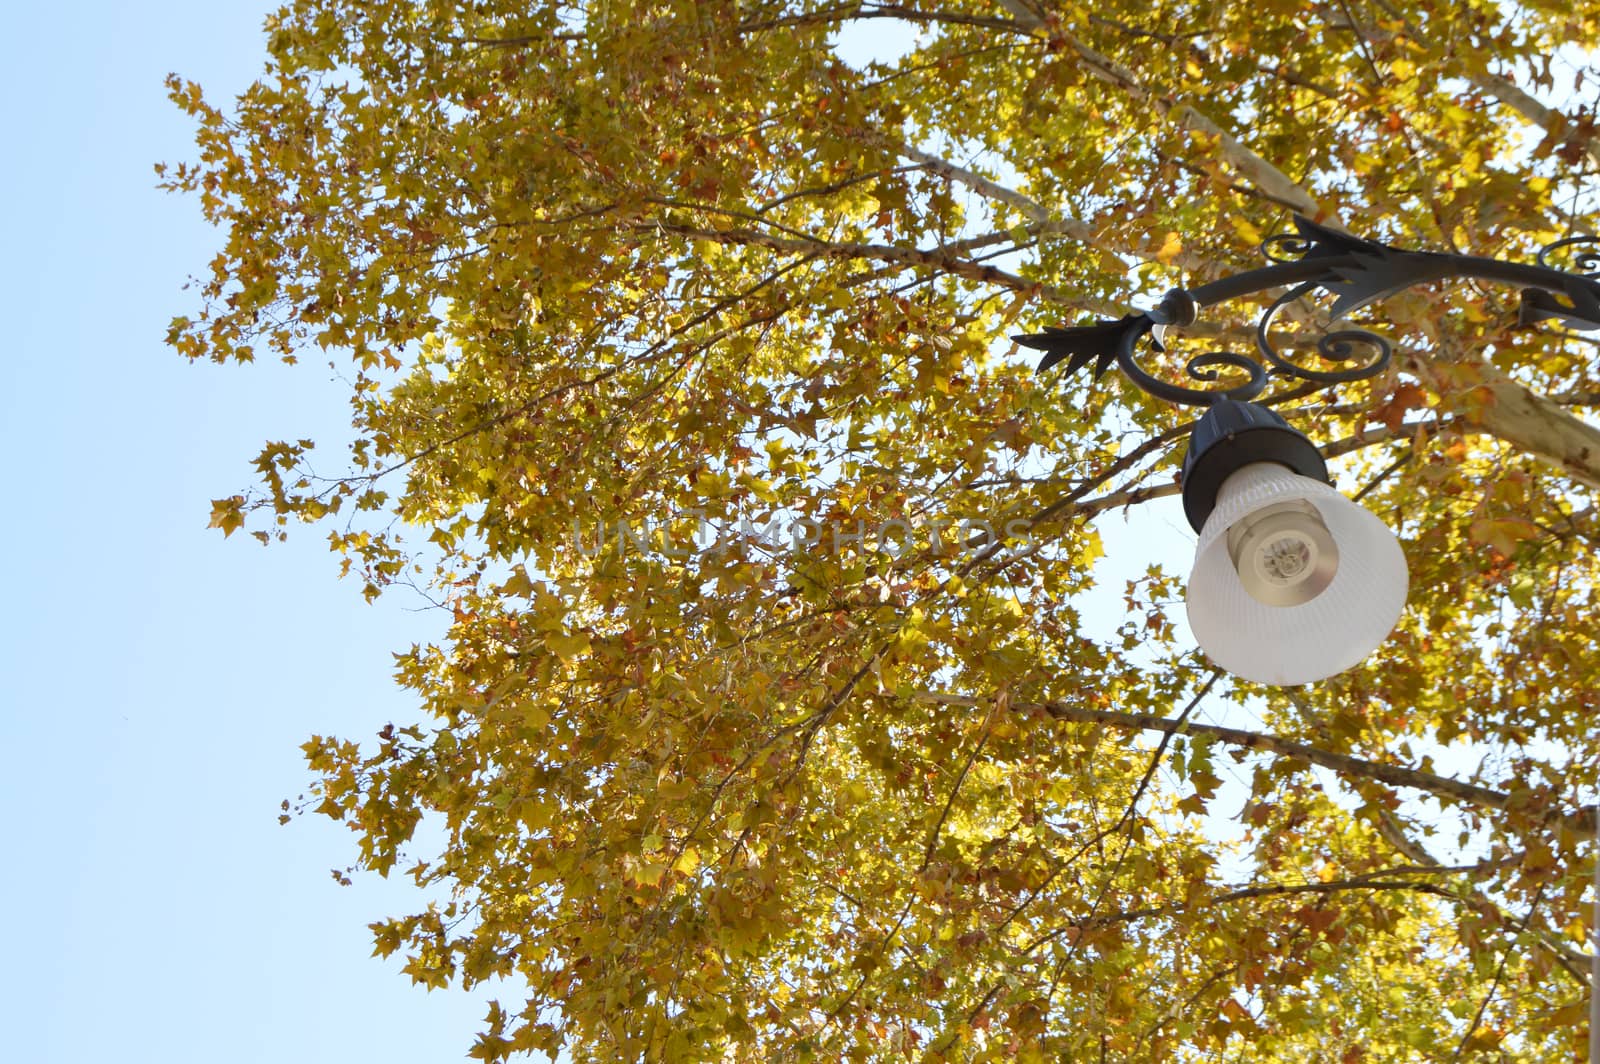 Vintage lantern on the background of yellow foliage and blue sky, autumn landscape in the garden.